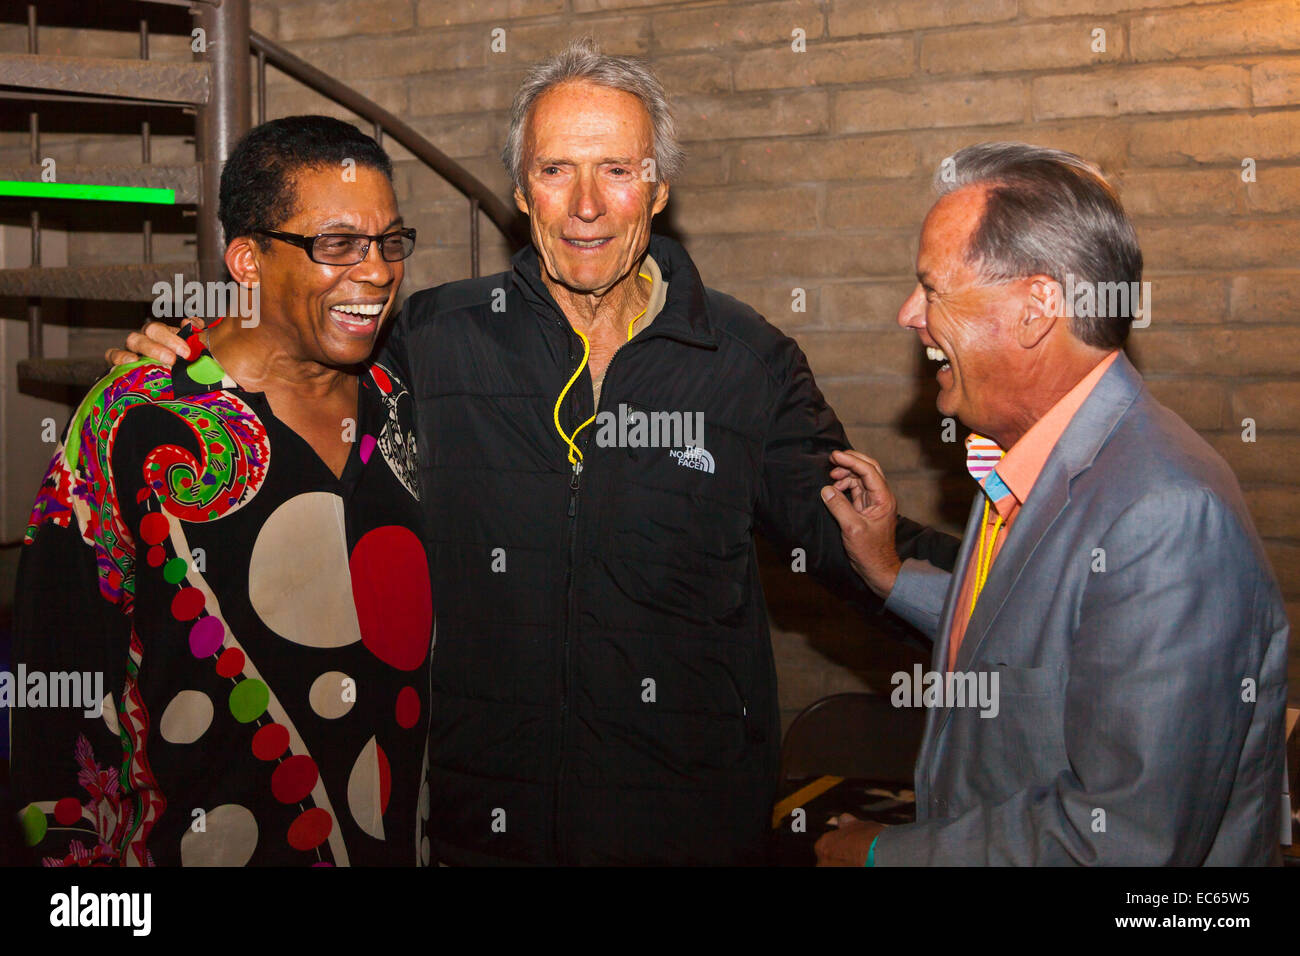 HERBIE HANCOCK backstage with CLINT EASTWOOD and TIM JACKSON at the MONTEREY JAZZ FESTIVAL Stock Photo